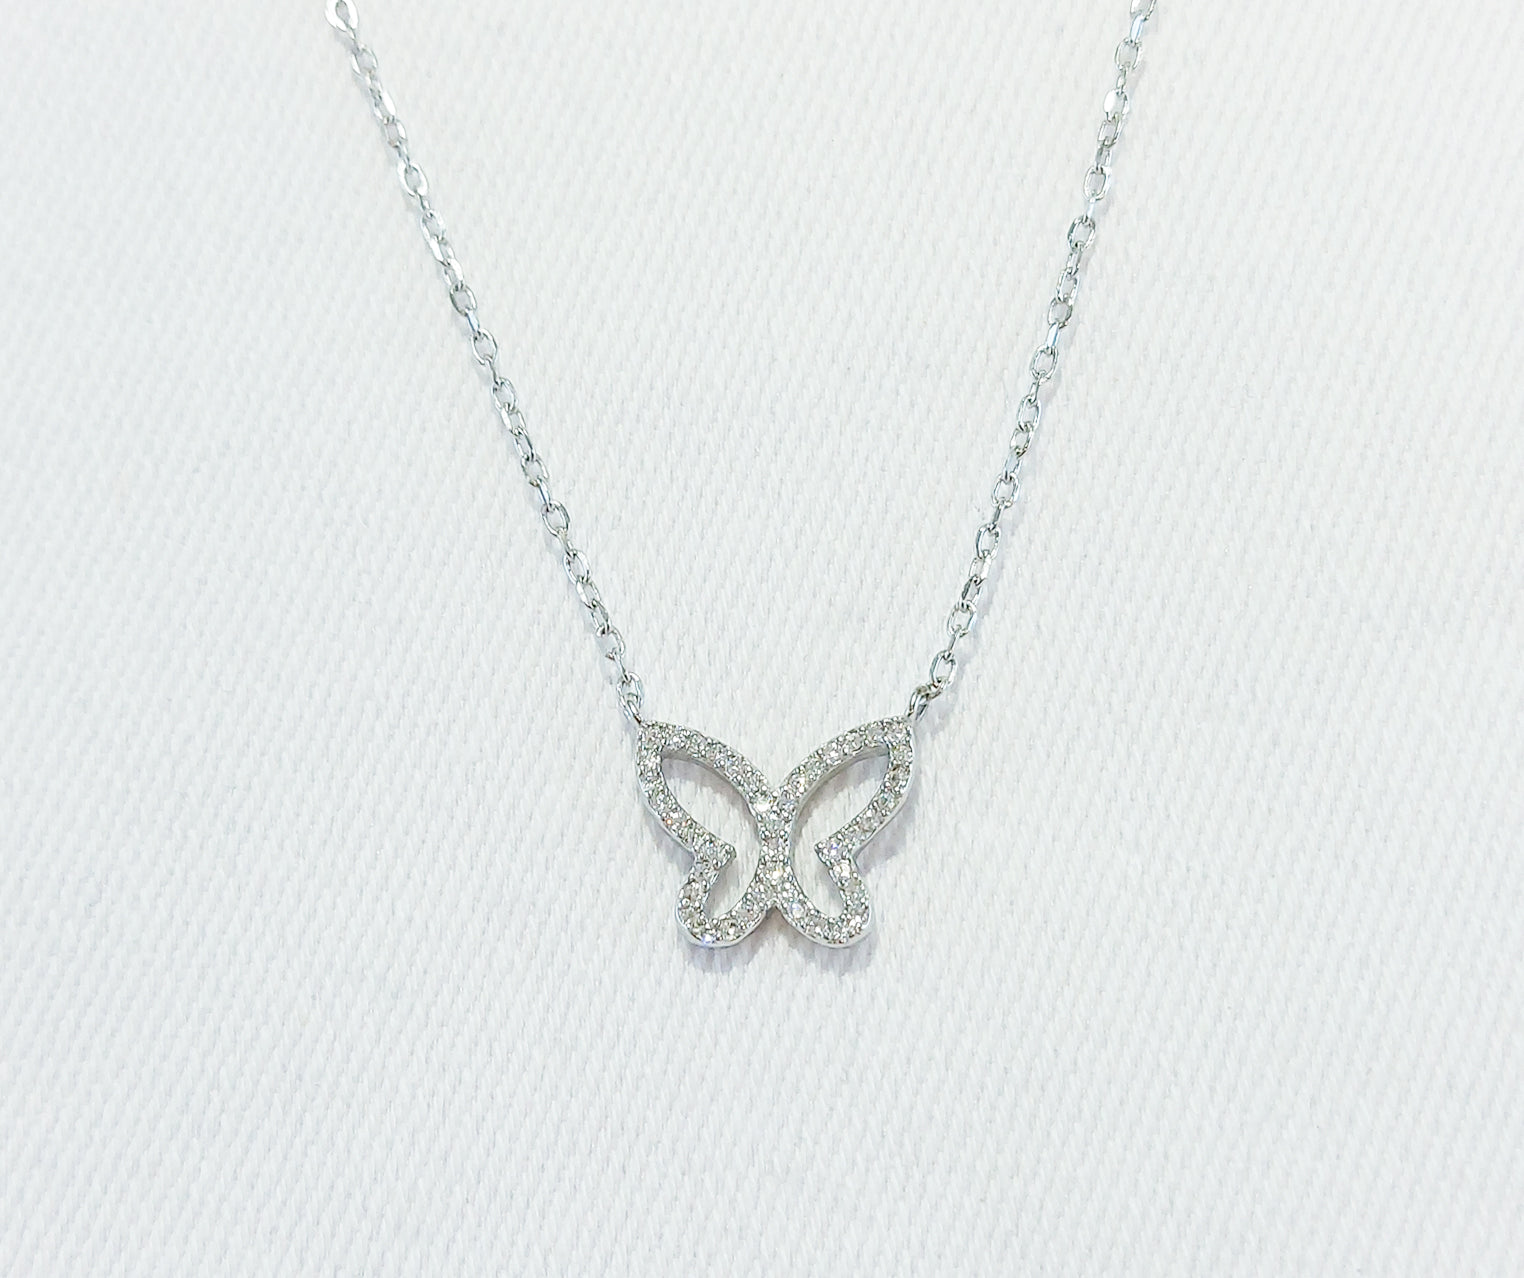 Sterling silver butterfly necklace with cubic zirconia stones